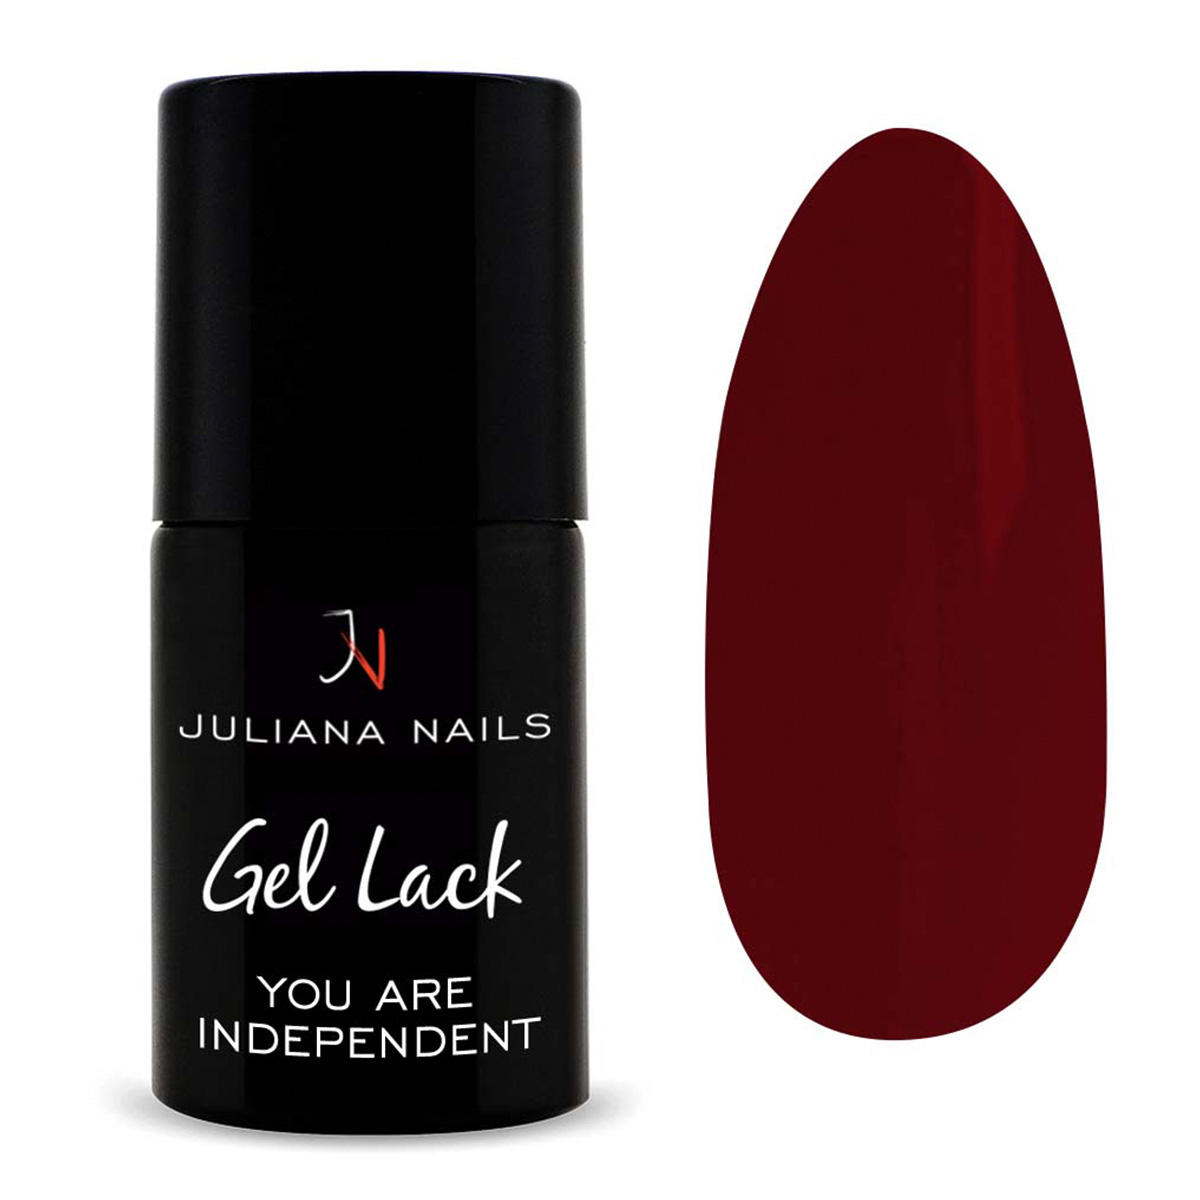 Juliana Nails Gel Lack You Are Independent, Flasche 6 ml - 1